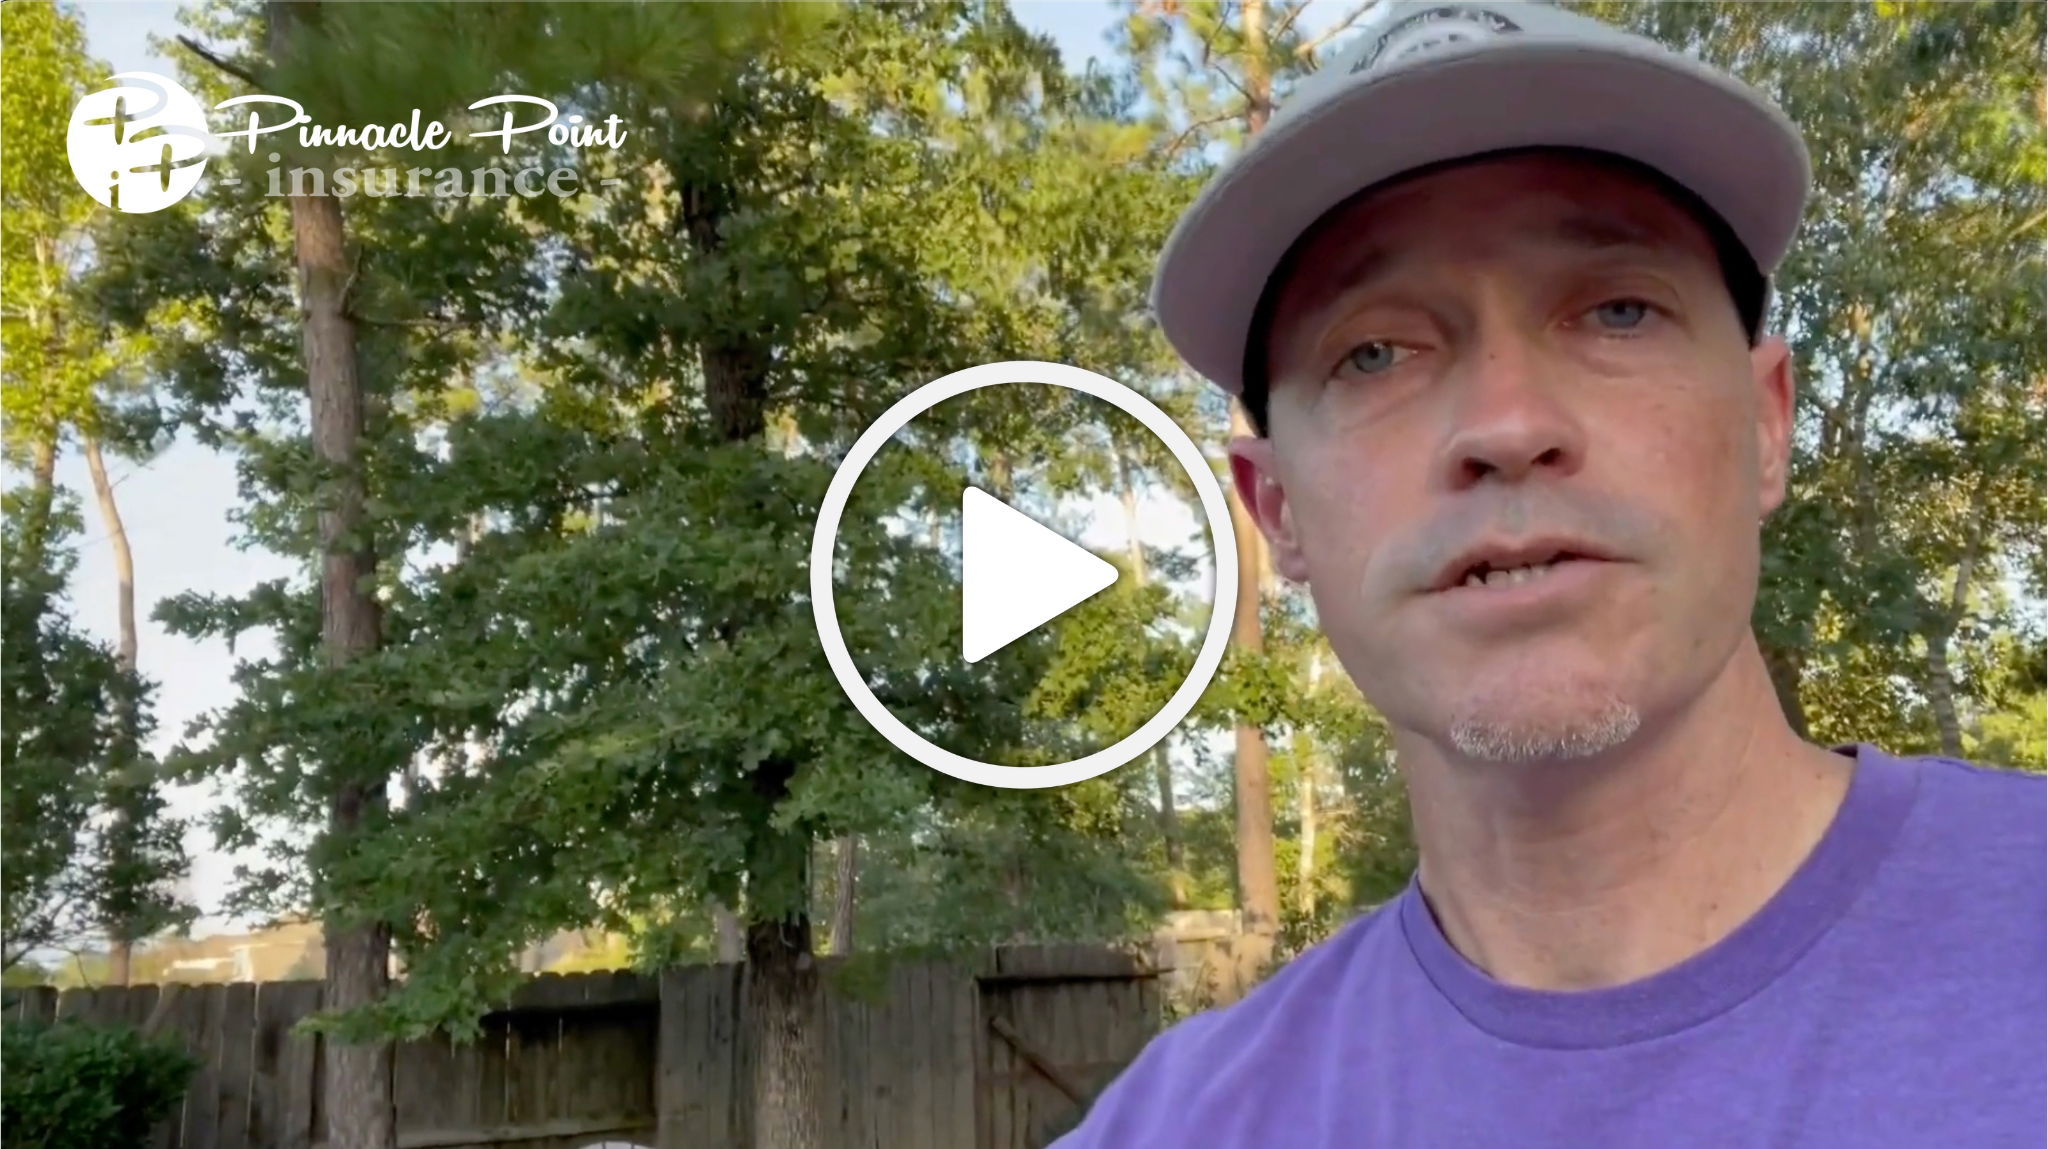 Man in a purple shirt and a gray hat discussing Hurricane Beryl food spoilage insurance outdoors, with trees and a wooden fence in the background.